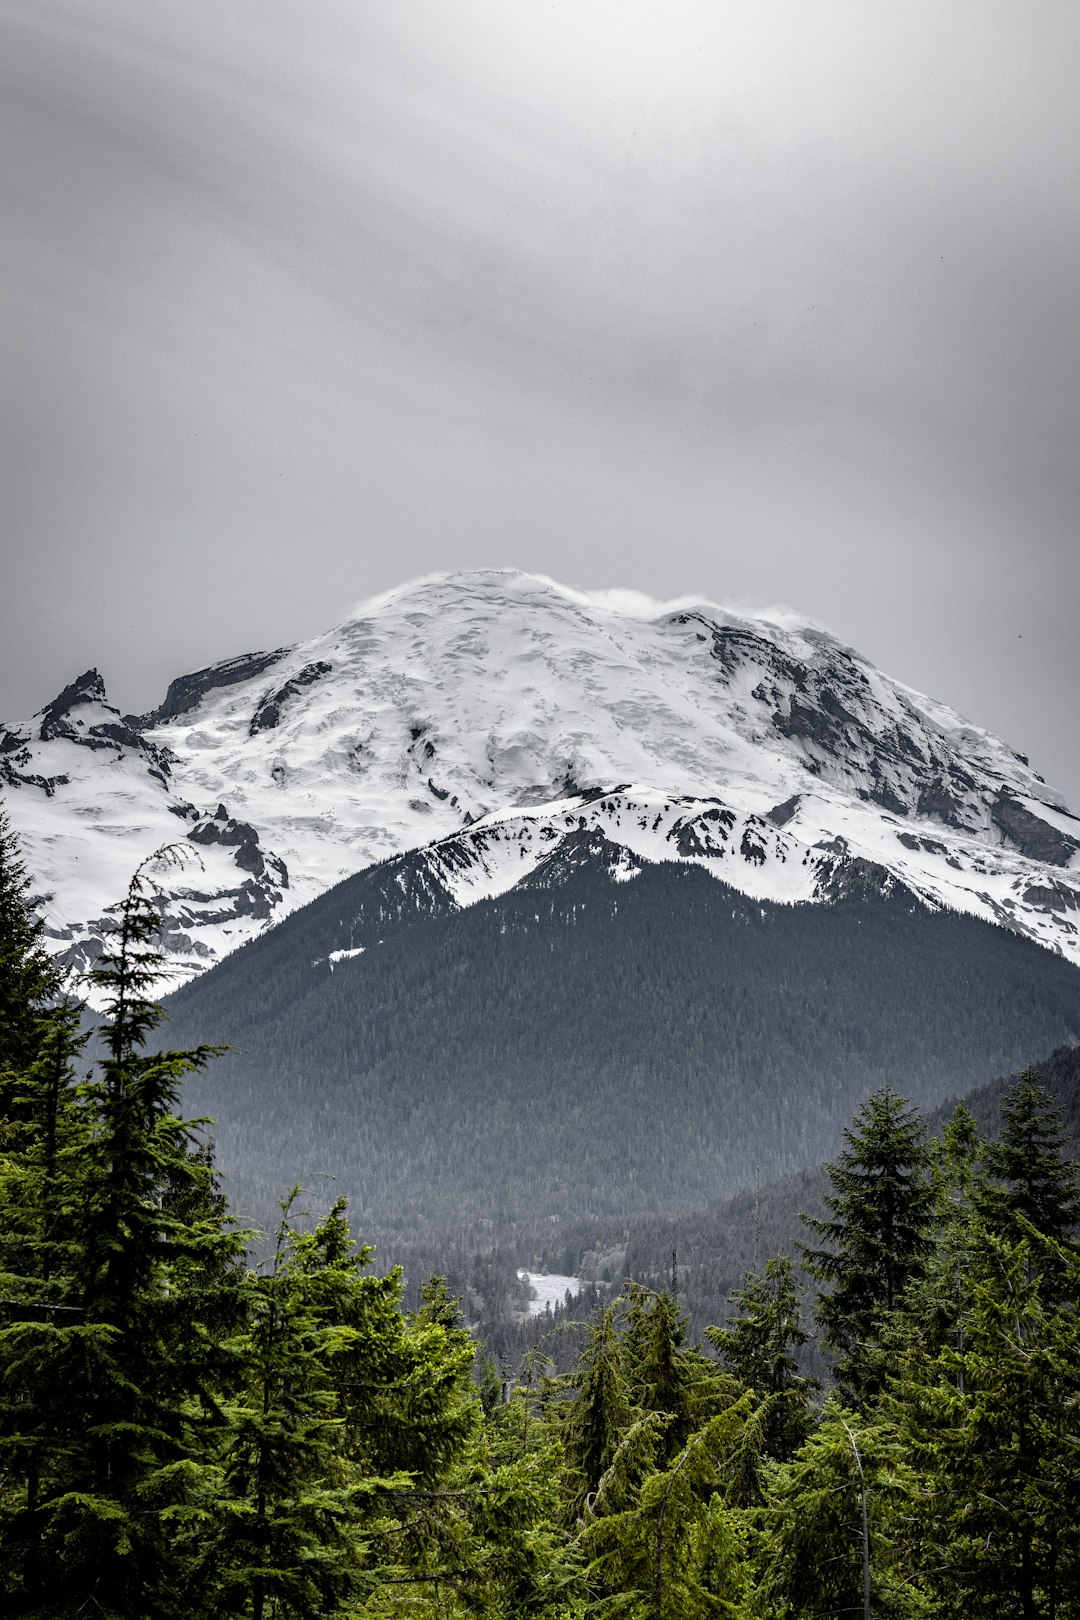 snow capped mountain under gray skies